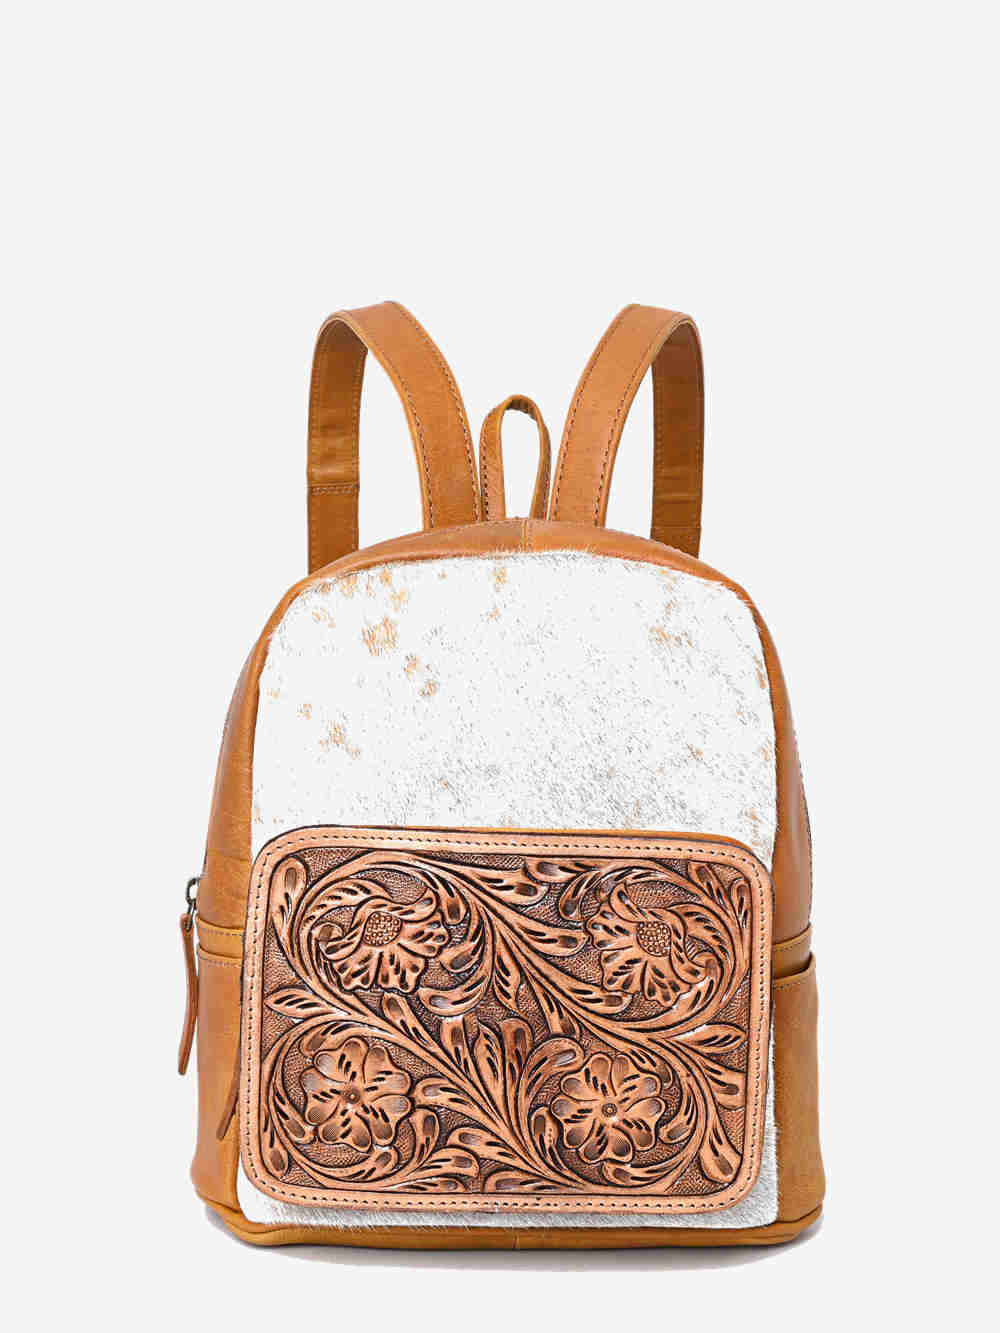 Montana West Genuine Hair On Cowhide Leather Tooled Floral Backpack - Montana West World